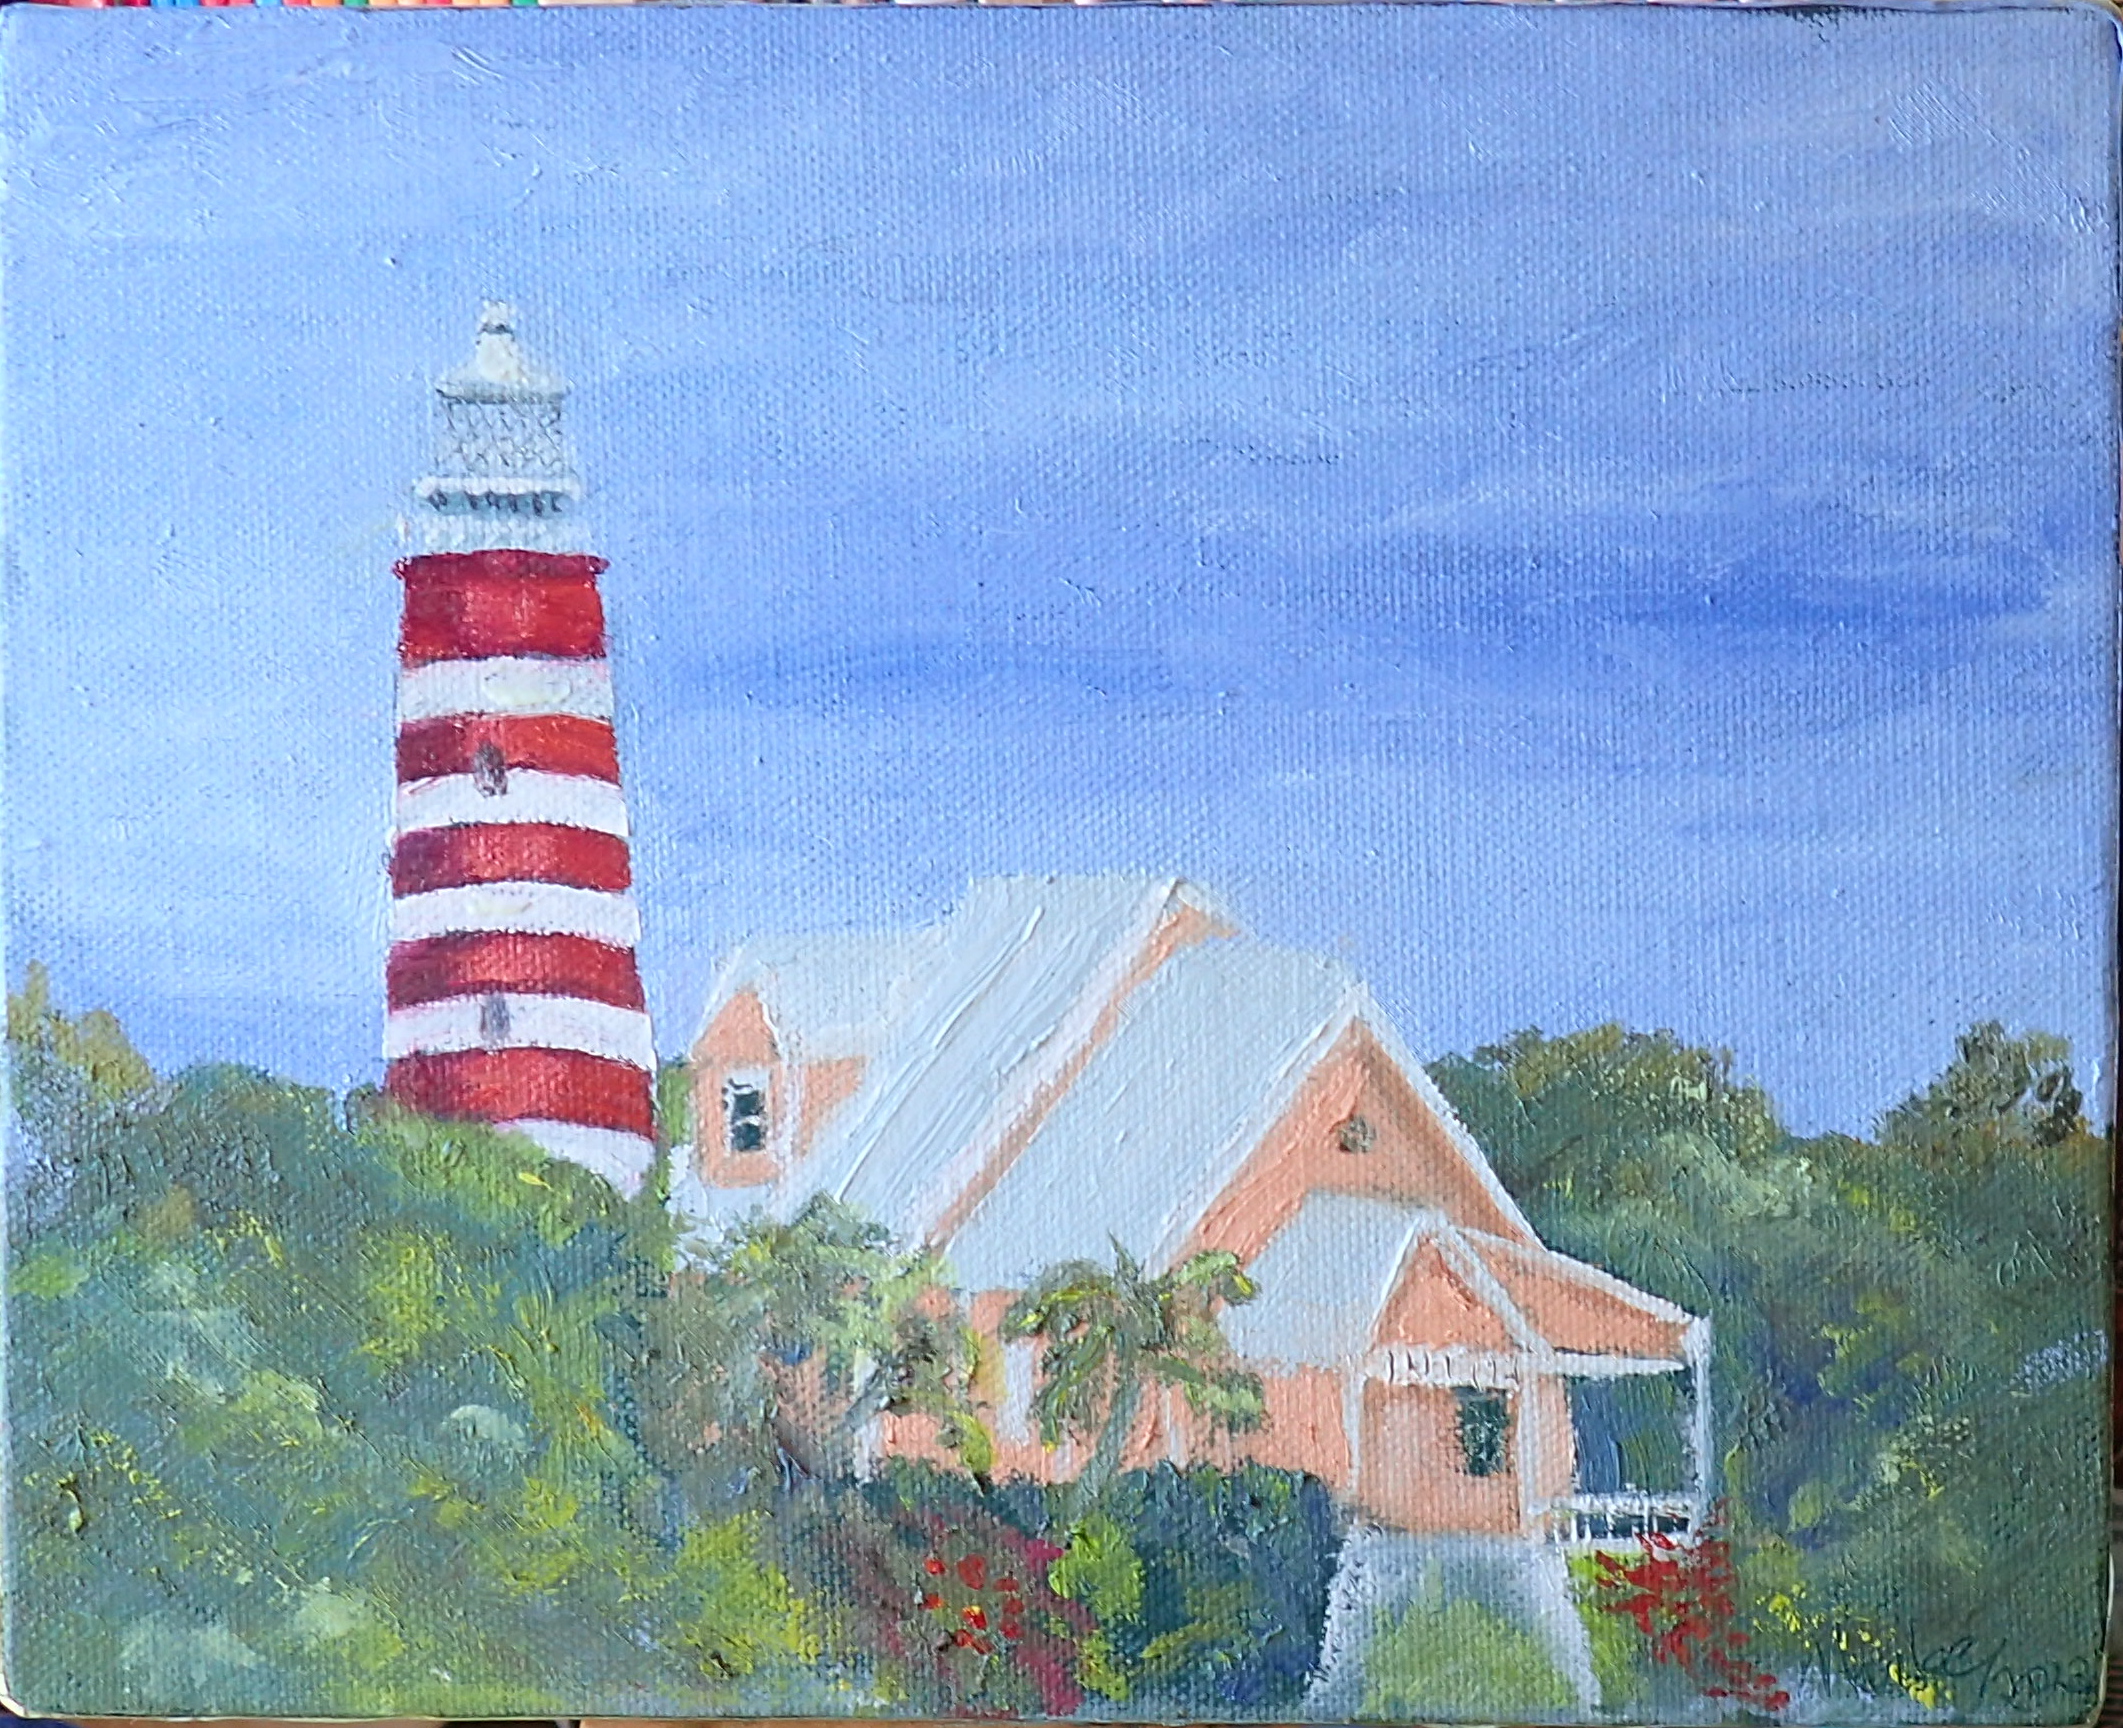 Original Oil 8x10" on Cradles Canvas.  The Hope Town Lighthouse towers above one of the many villas at the Hope Town Inn and Marina in Hope Town. 